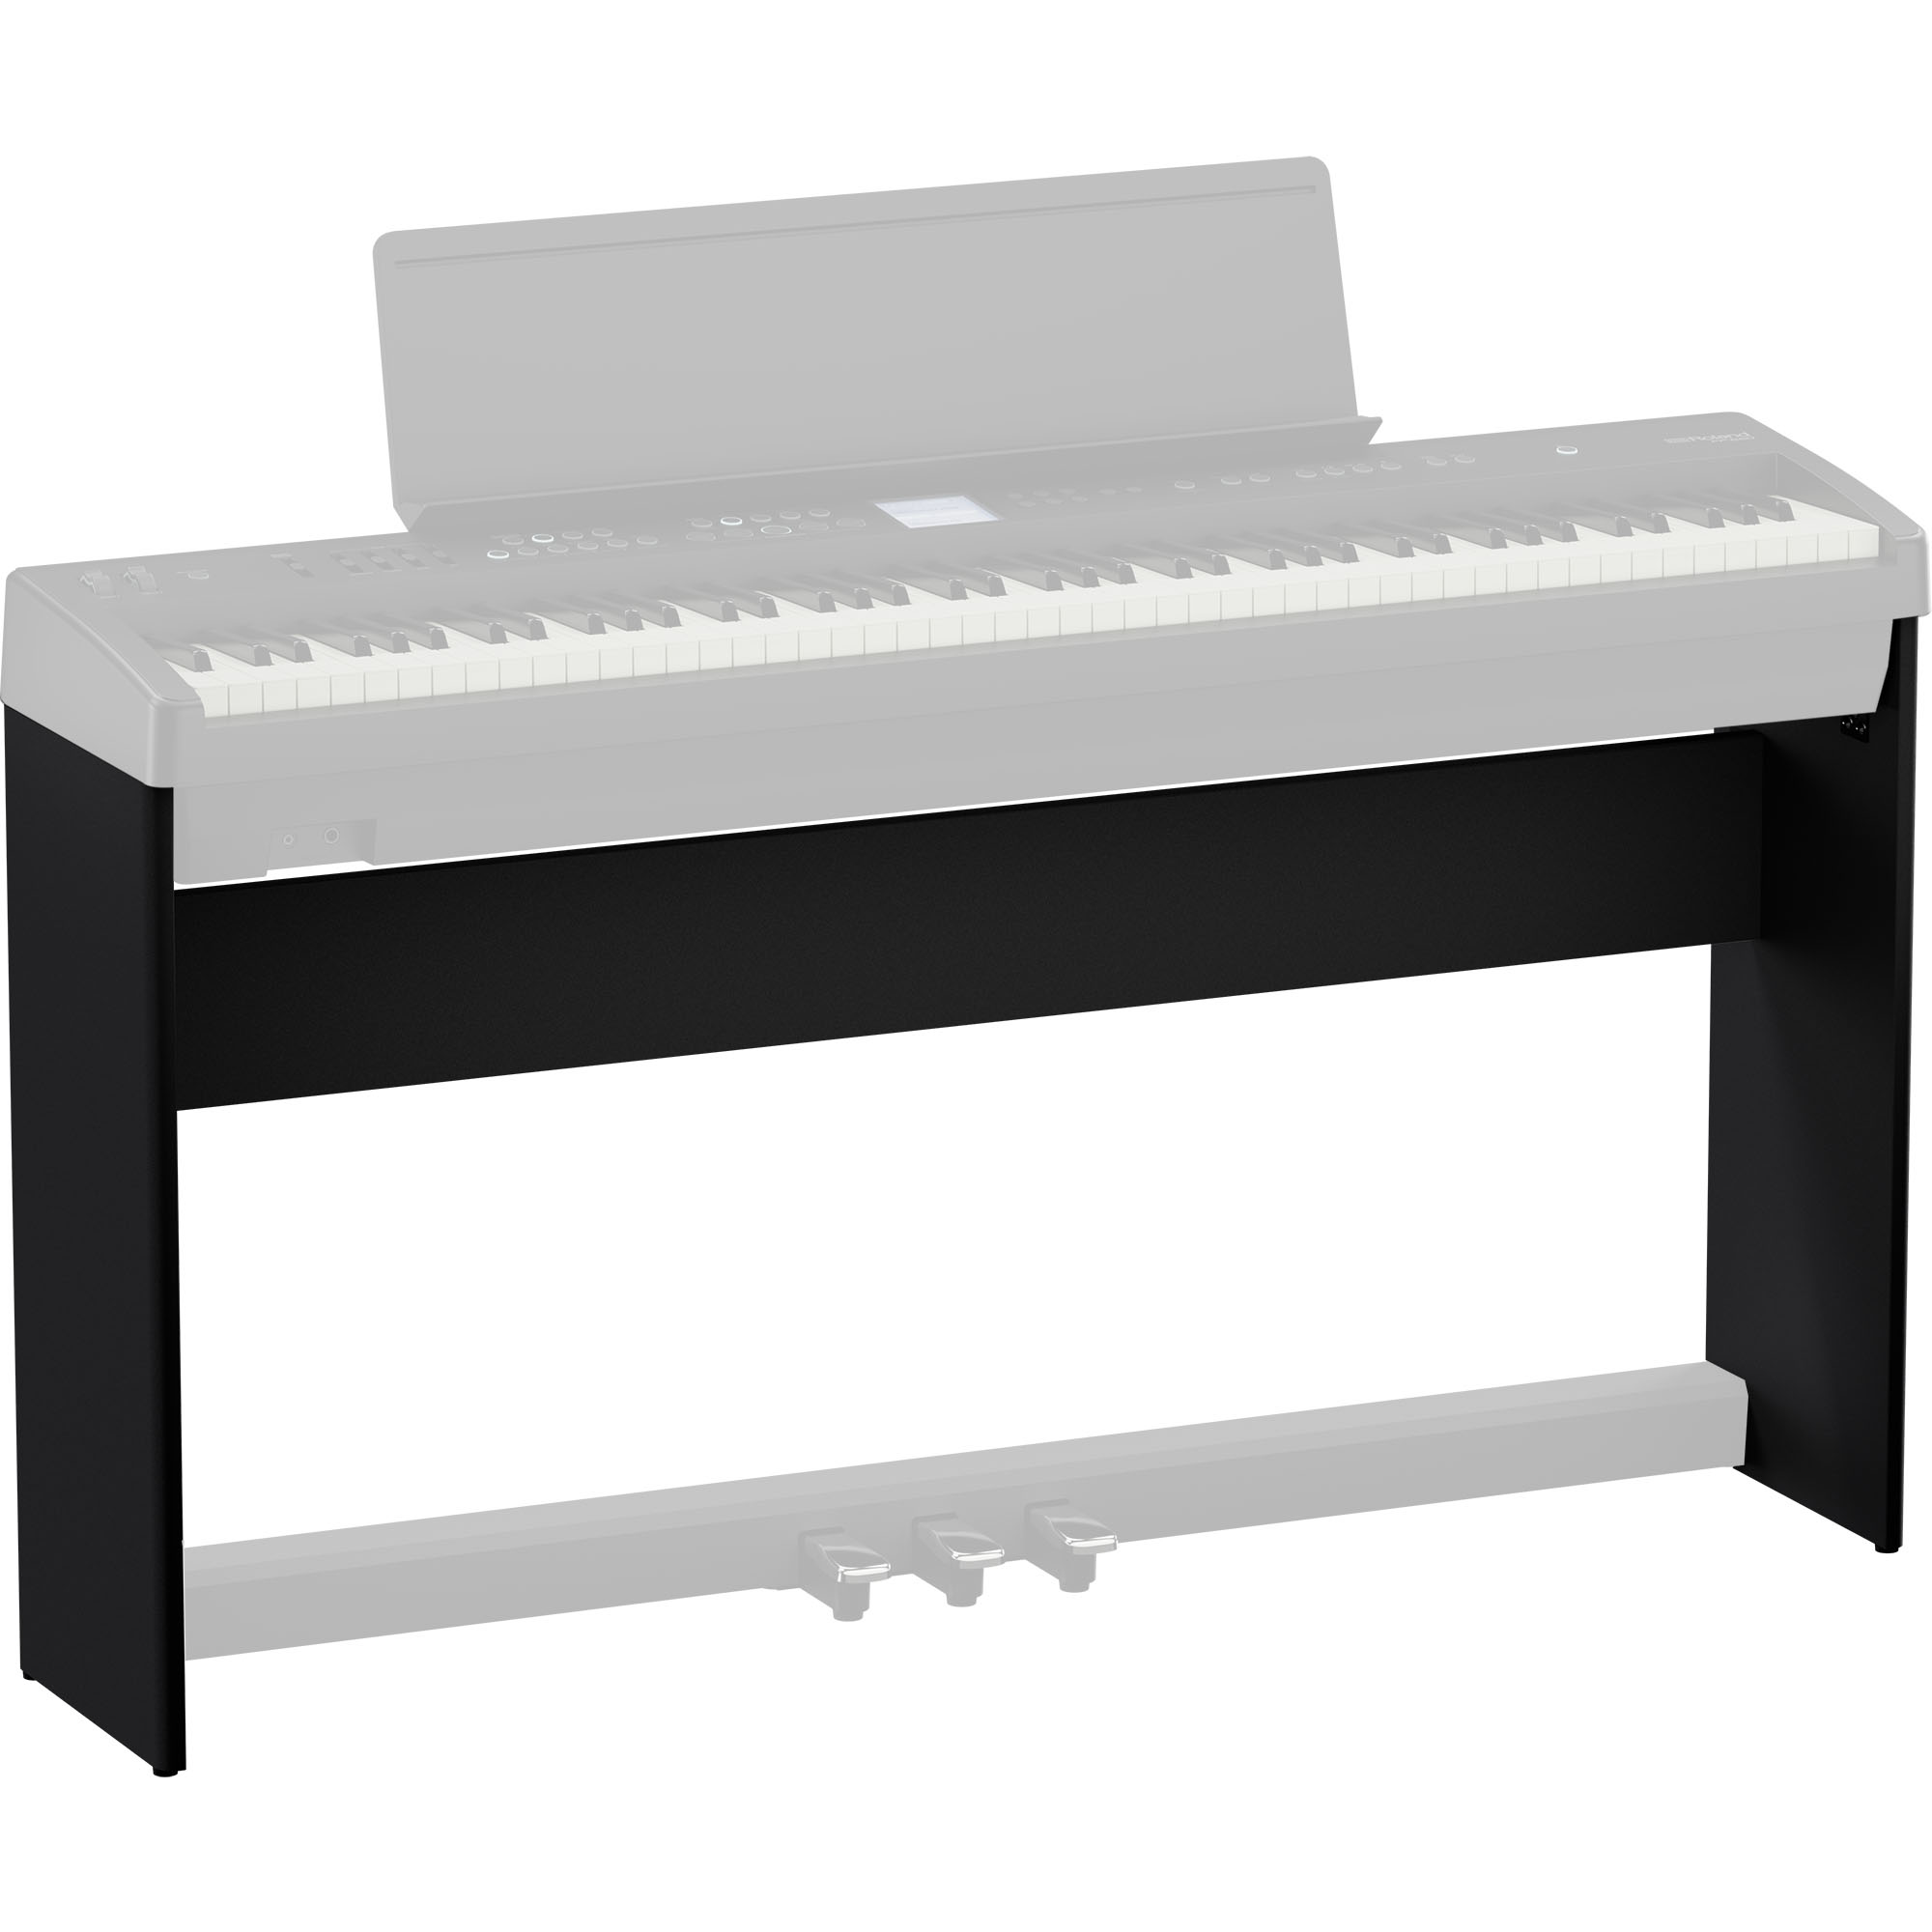 An image of Roland KSFE50 Piano Stand | PMT Online